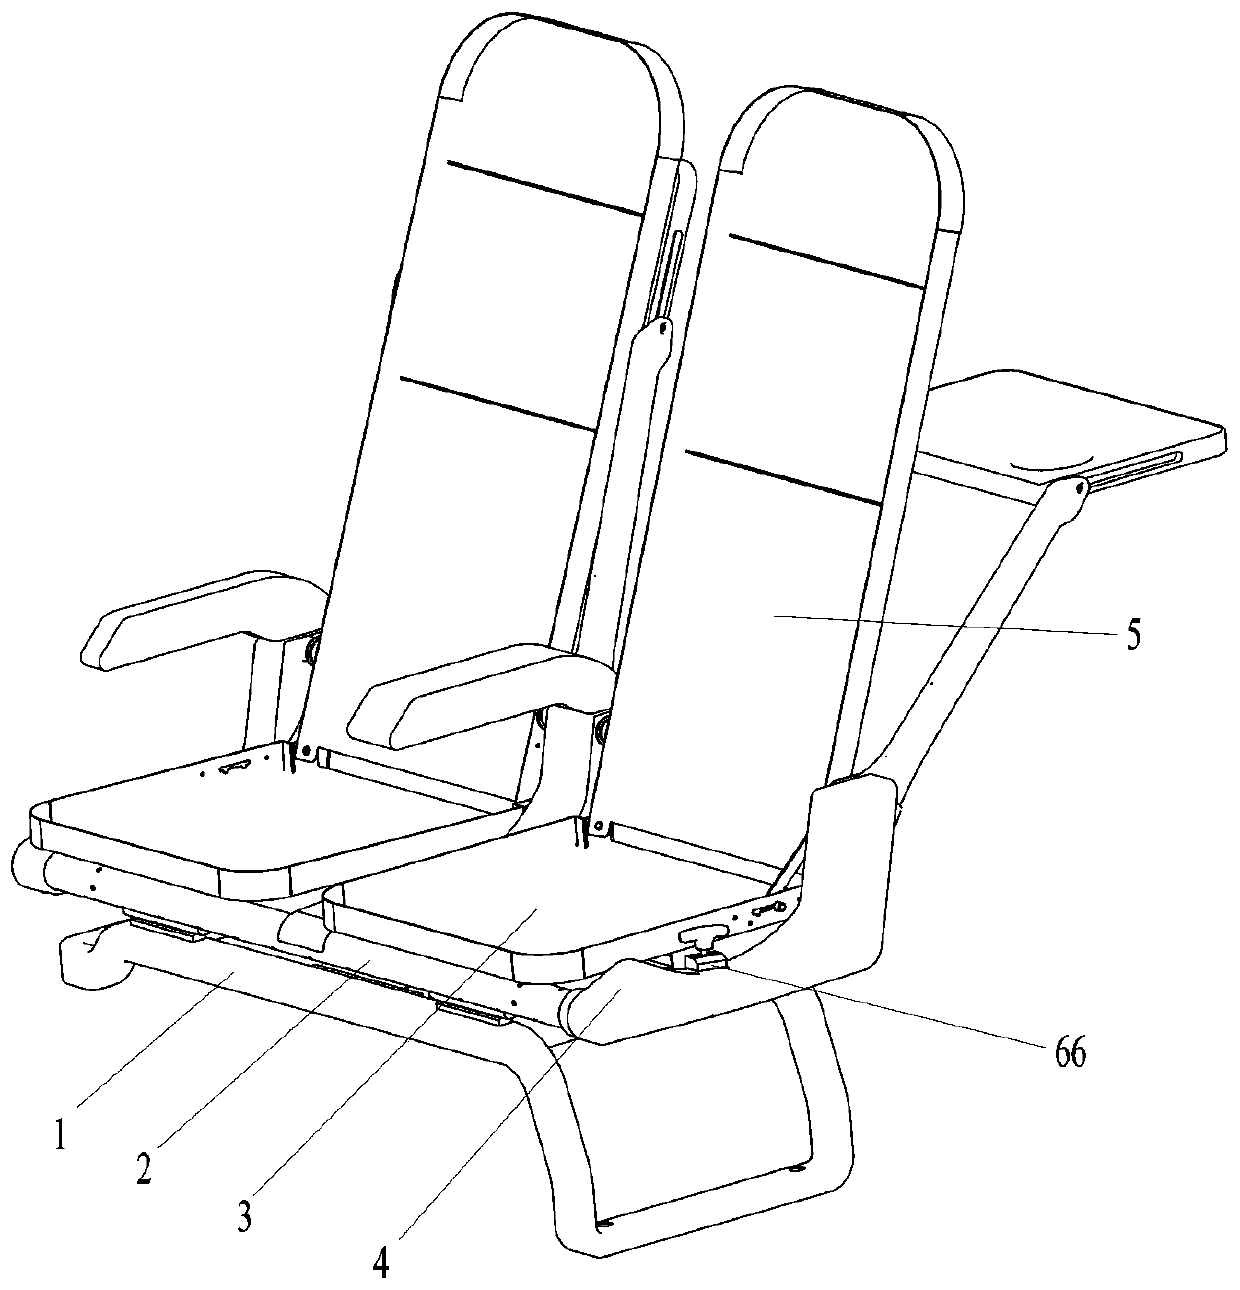 Seat capable of improving comfort